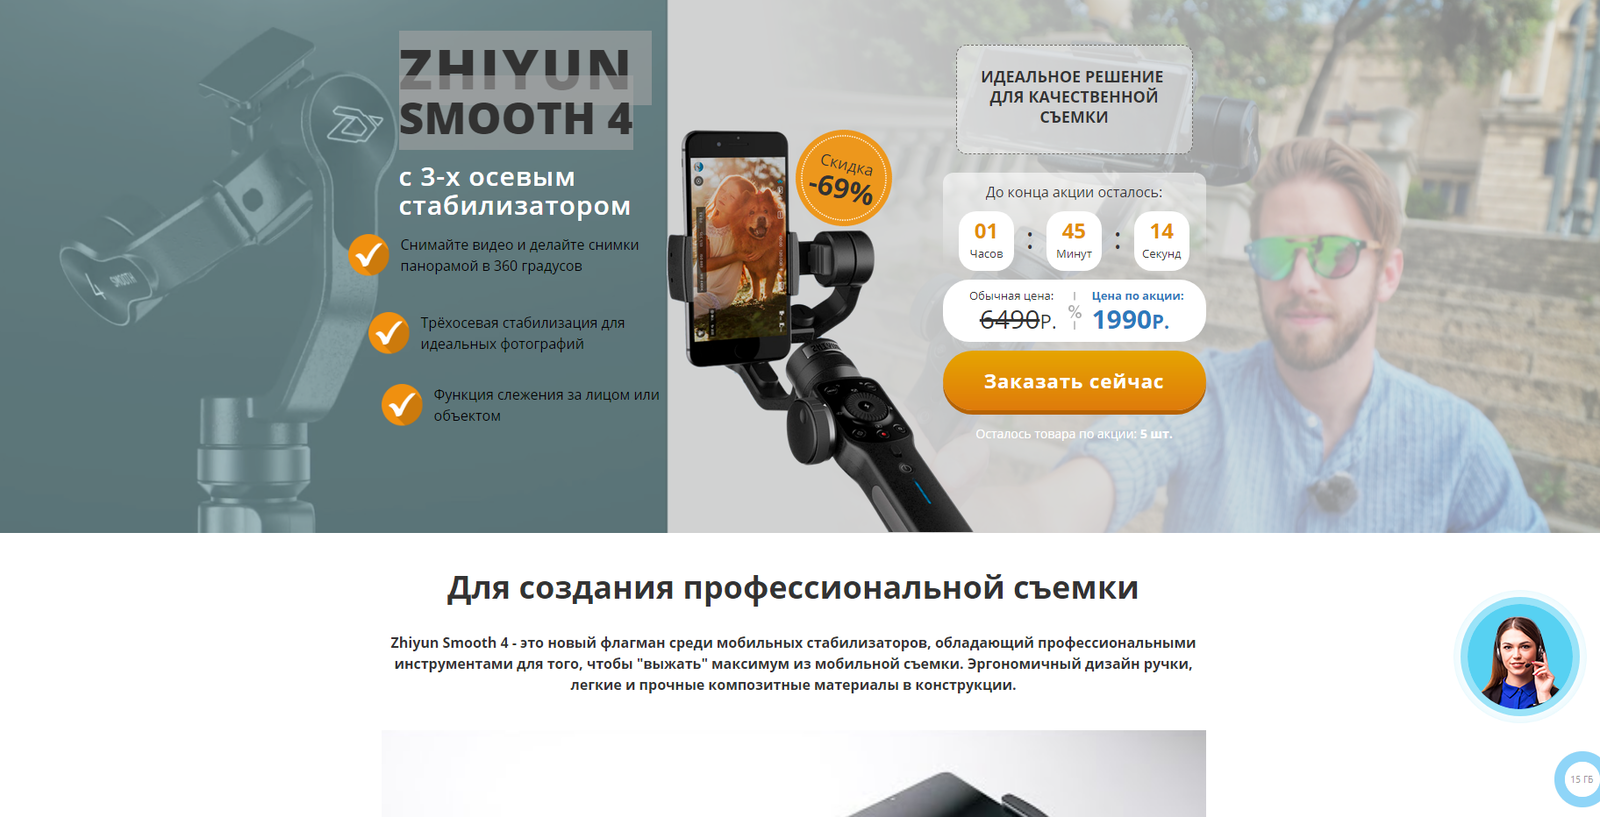 Zhiyun smooth 4 for 1990 rubles - cheating or not - My, , Divorce, Deception, Гаджеты, Steadicam, 